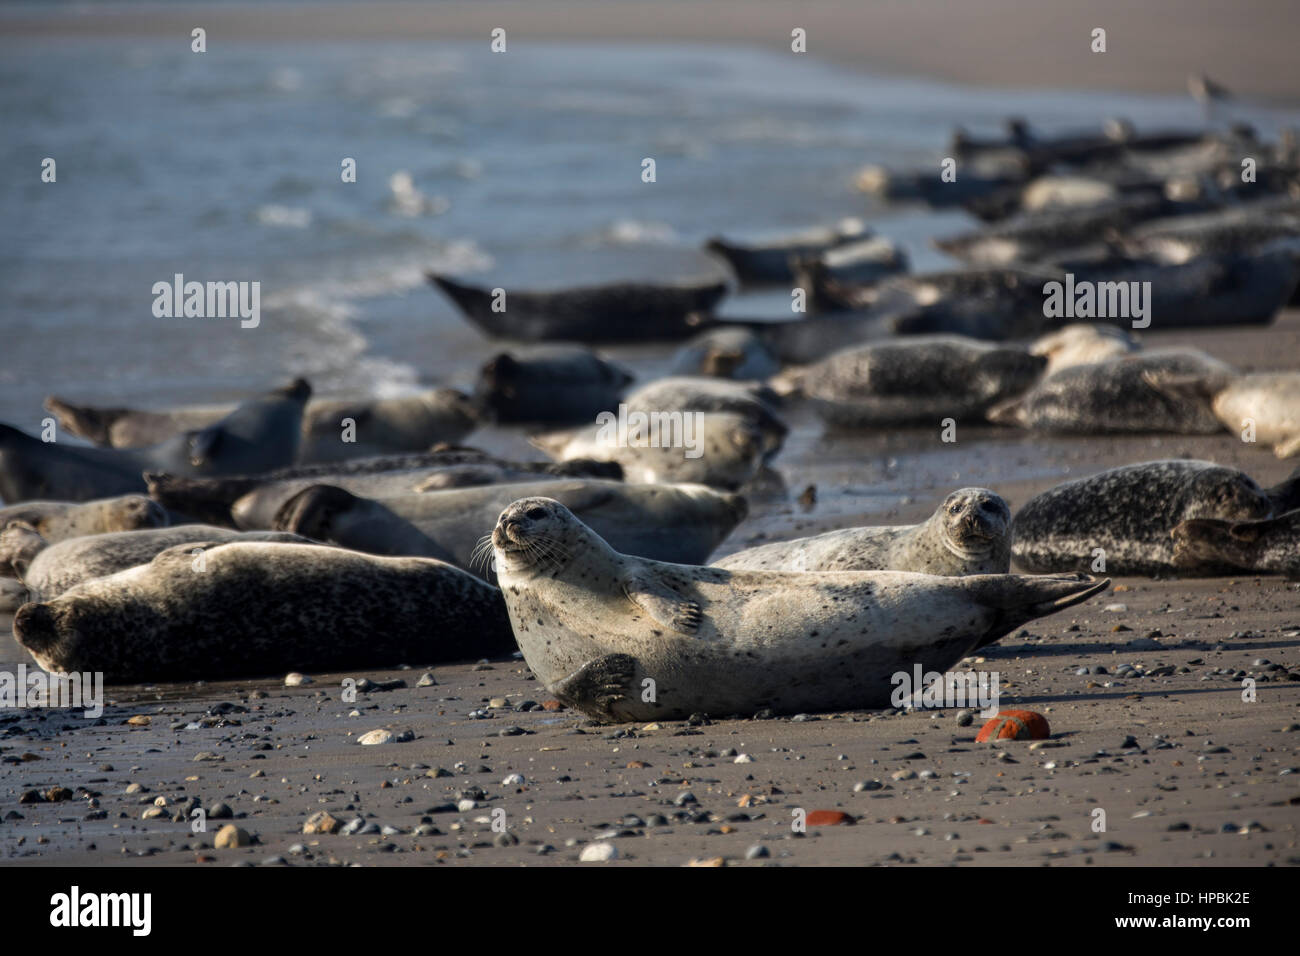 Seals on the beach of the Dune, a neighbor island of Helgoland, a German island in the deep sea region of the North Sea, Stock Photo